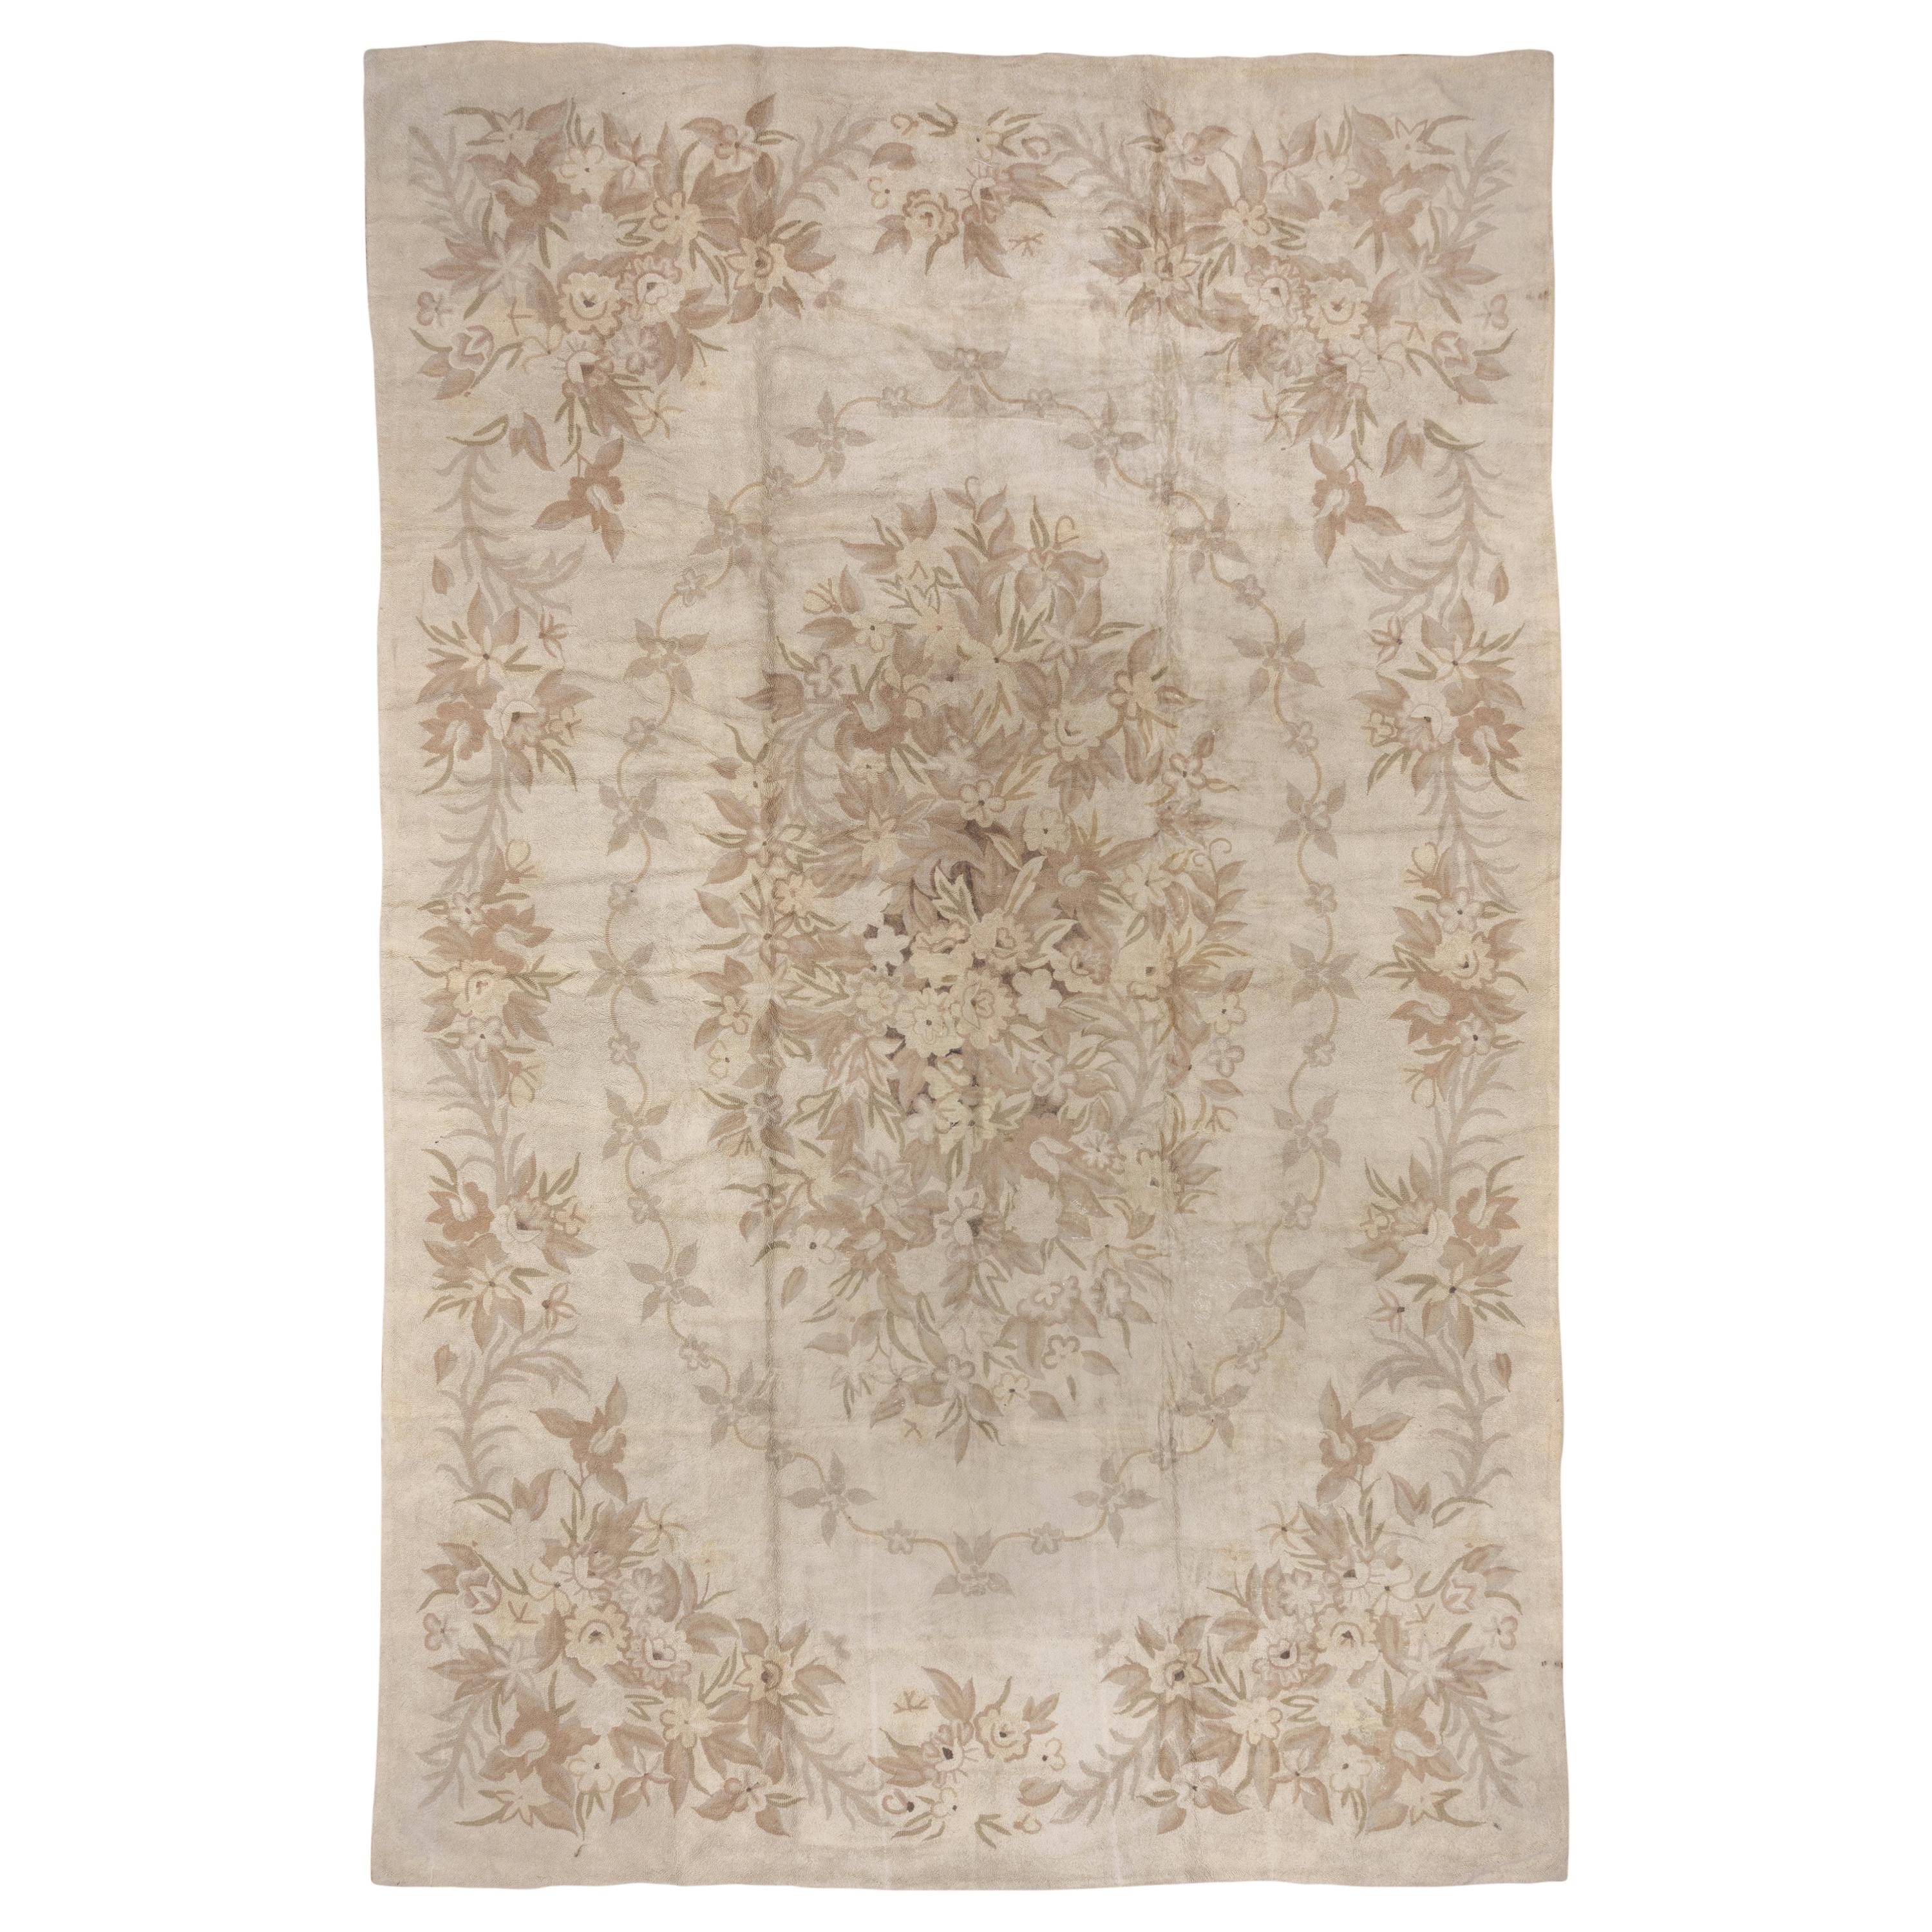 Antique Chinese Hooked Carpet with Neutral Tones, Floral Design, circa 1940s For Sale